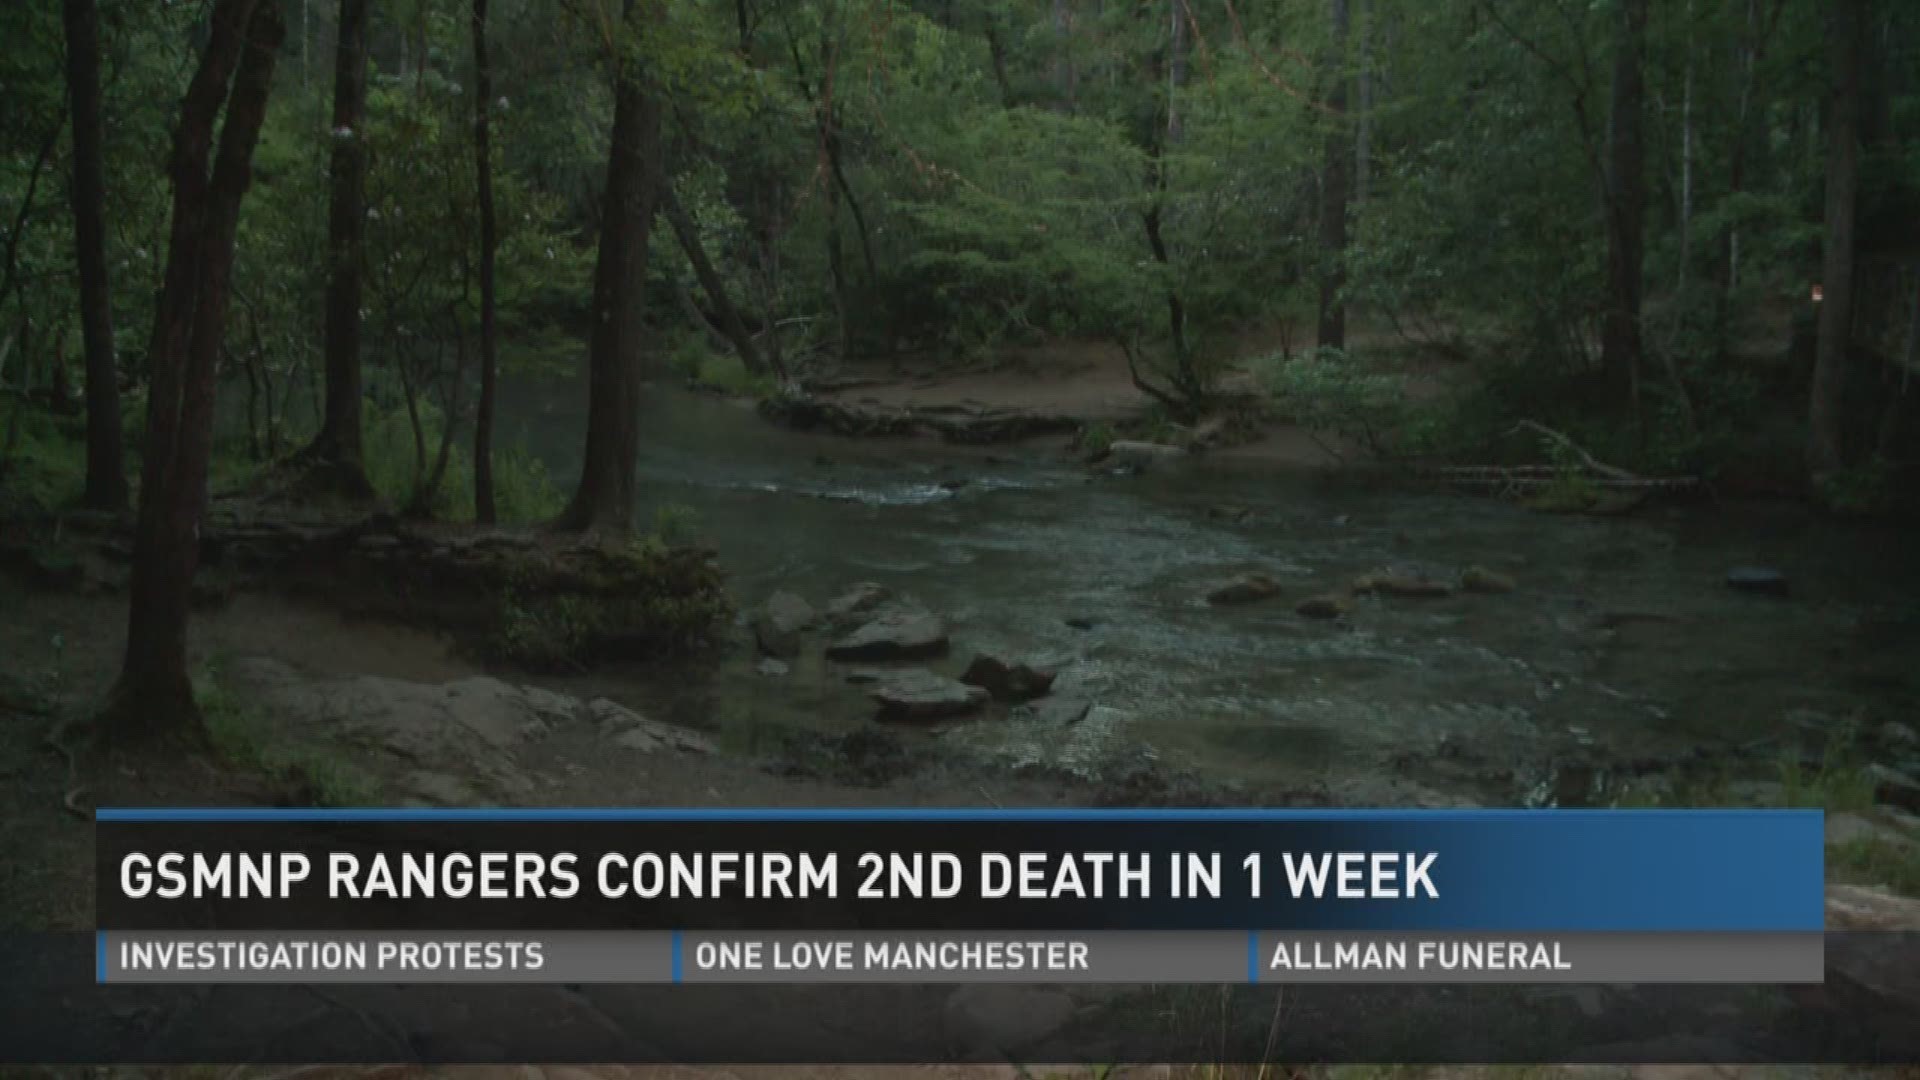 A man was found dead in a suspected drowning at Abrams Creek in the Smokies.